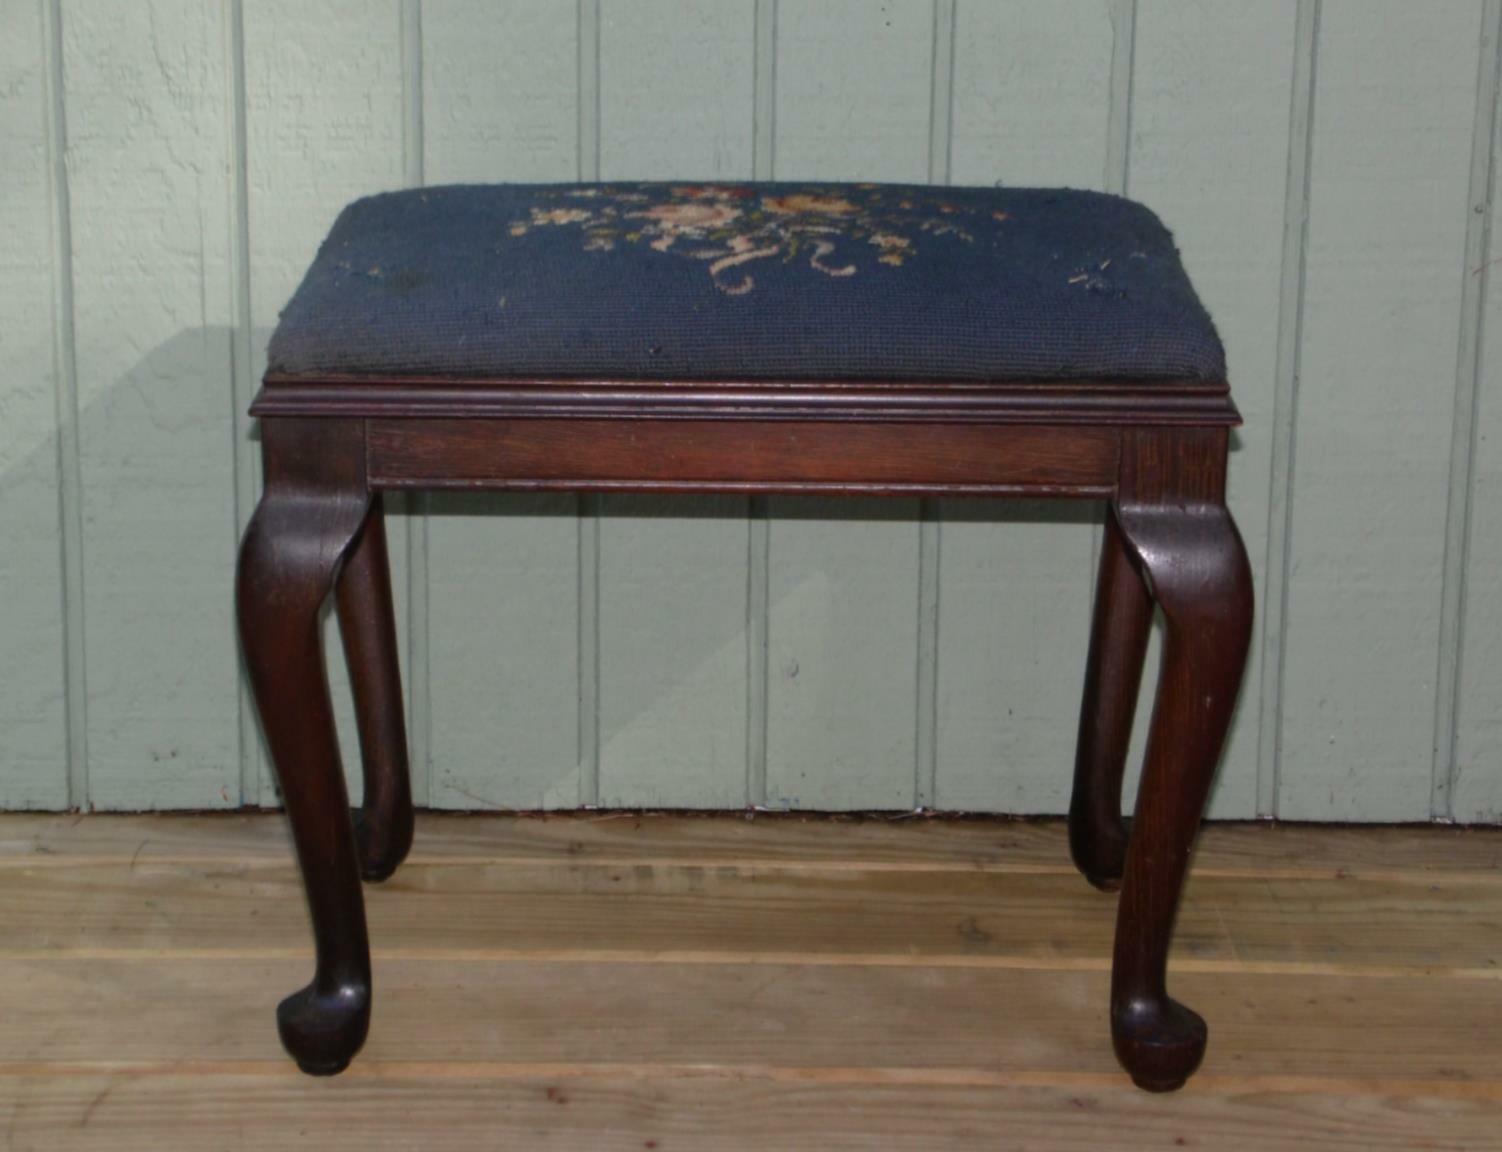 Vintage Mahogany Queen Anne Footstool Needlepoint Ottoman Stool